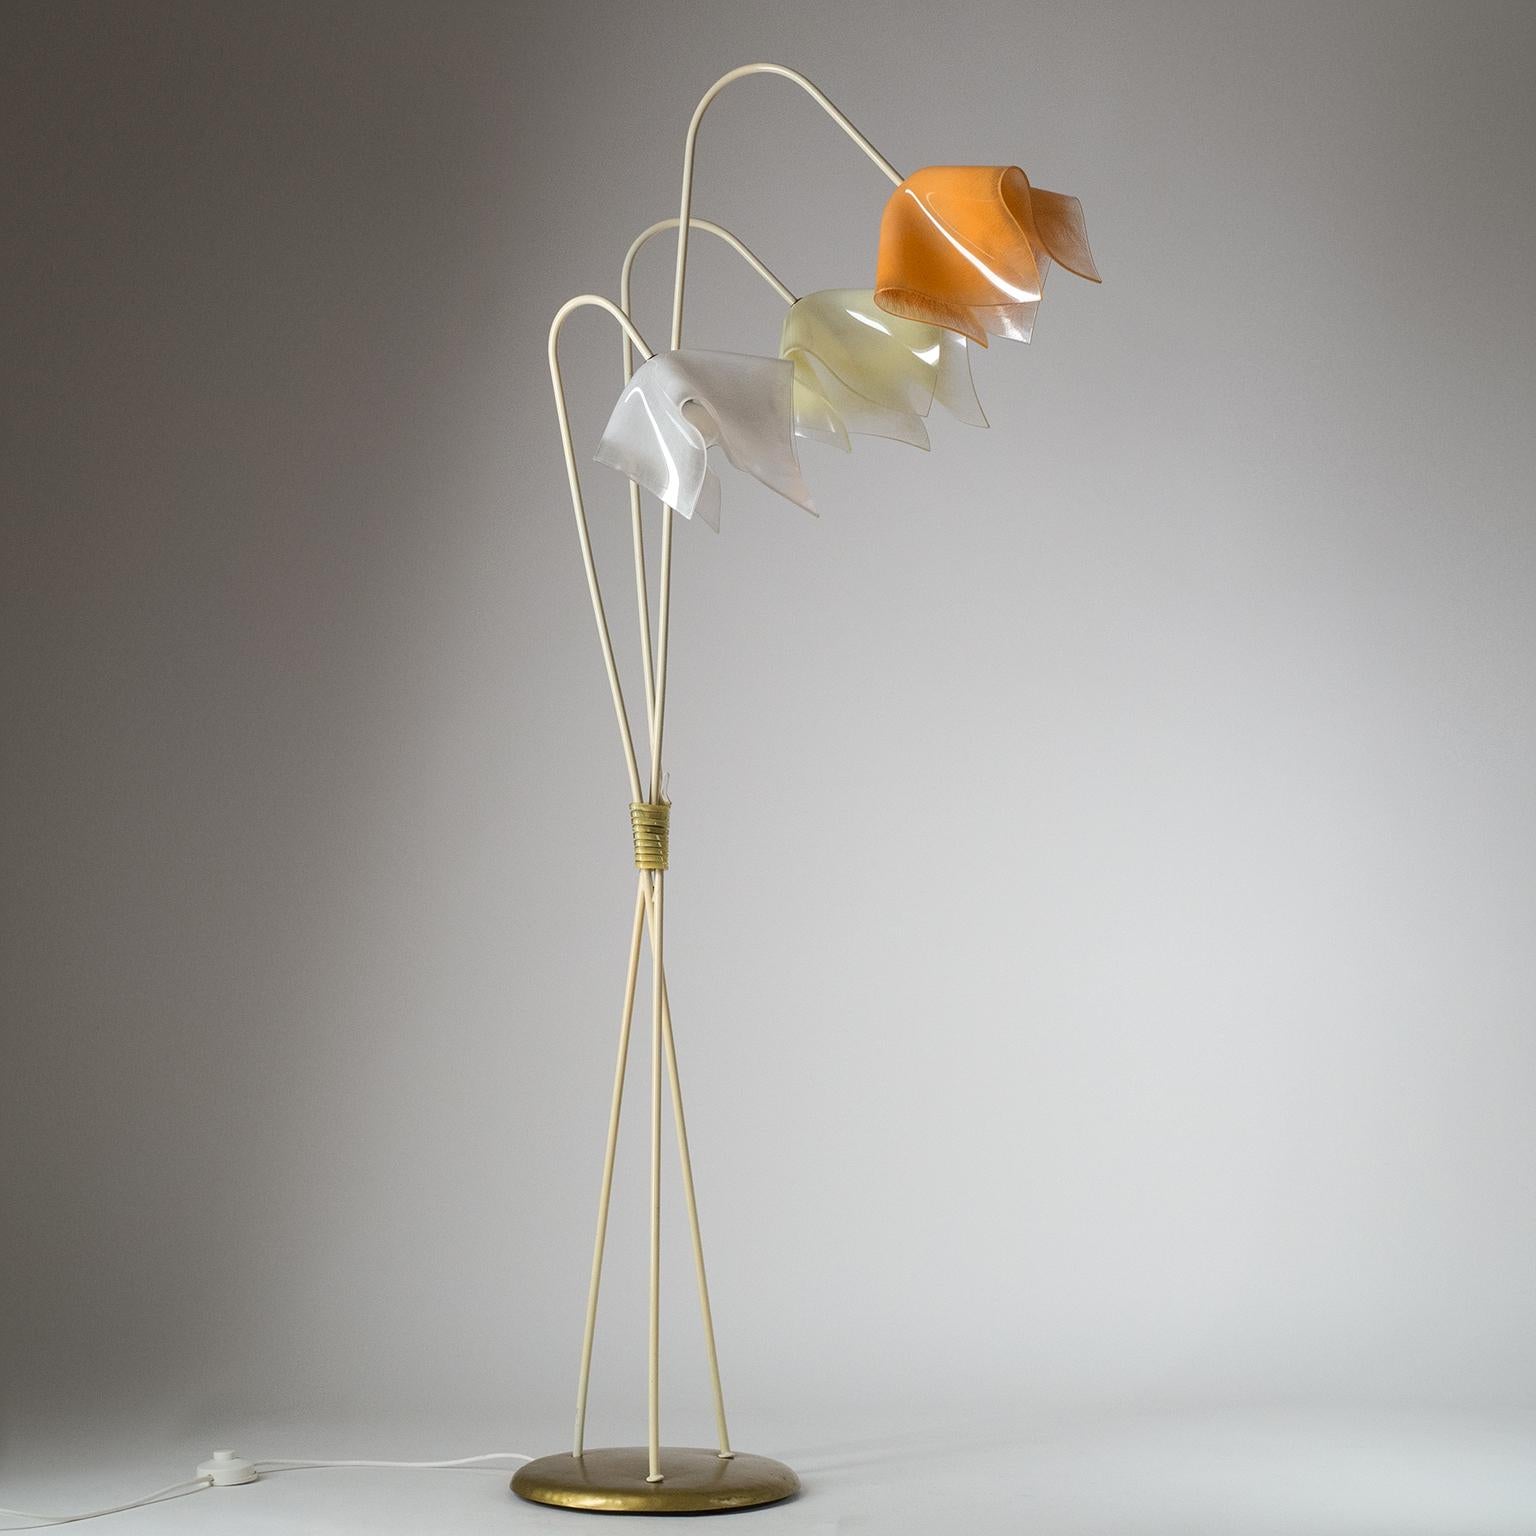 Rare midcentury floor lamp from the late 1950s-early 1960s. Asymetric modernist design with a large weighted base enameled in metallic gold and three stems, each with an abstract floral shade. The acrylic diffusers are coarsely sanded on the inside